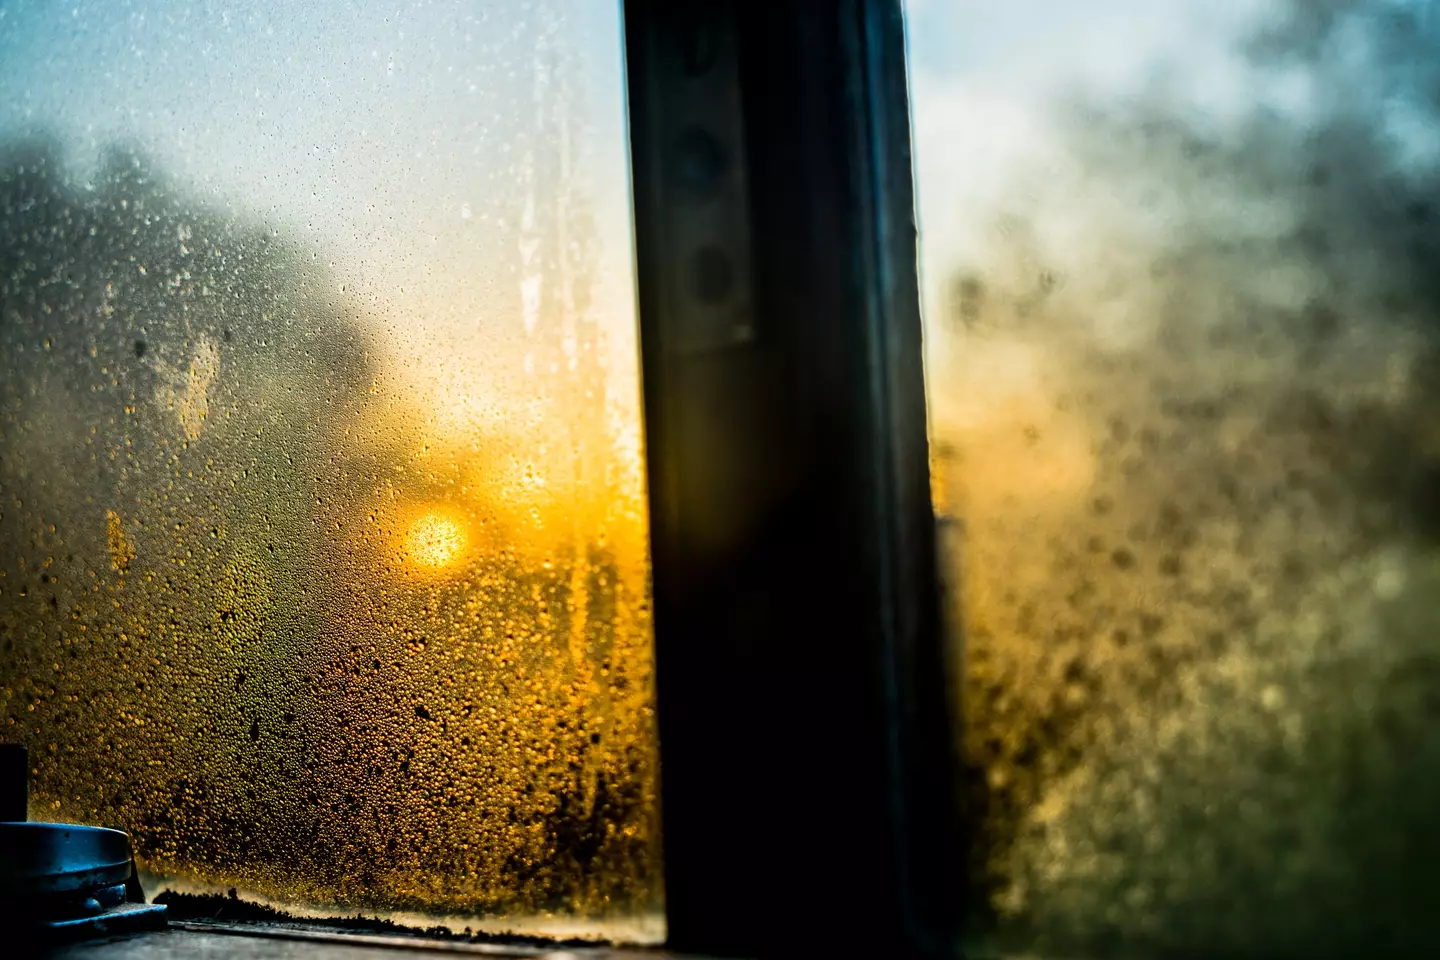 Condensation is often found on bedroom windows in the colder months.